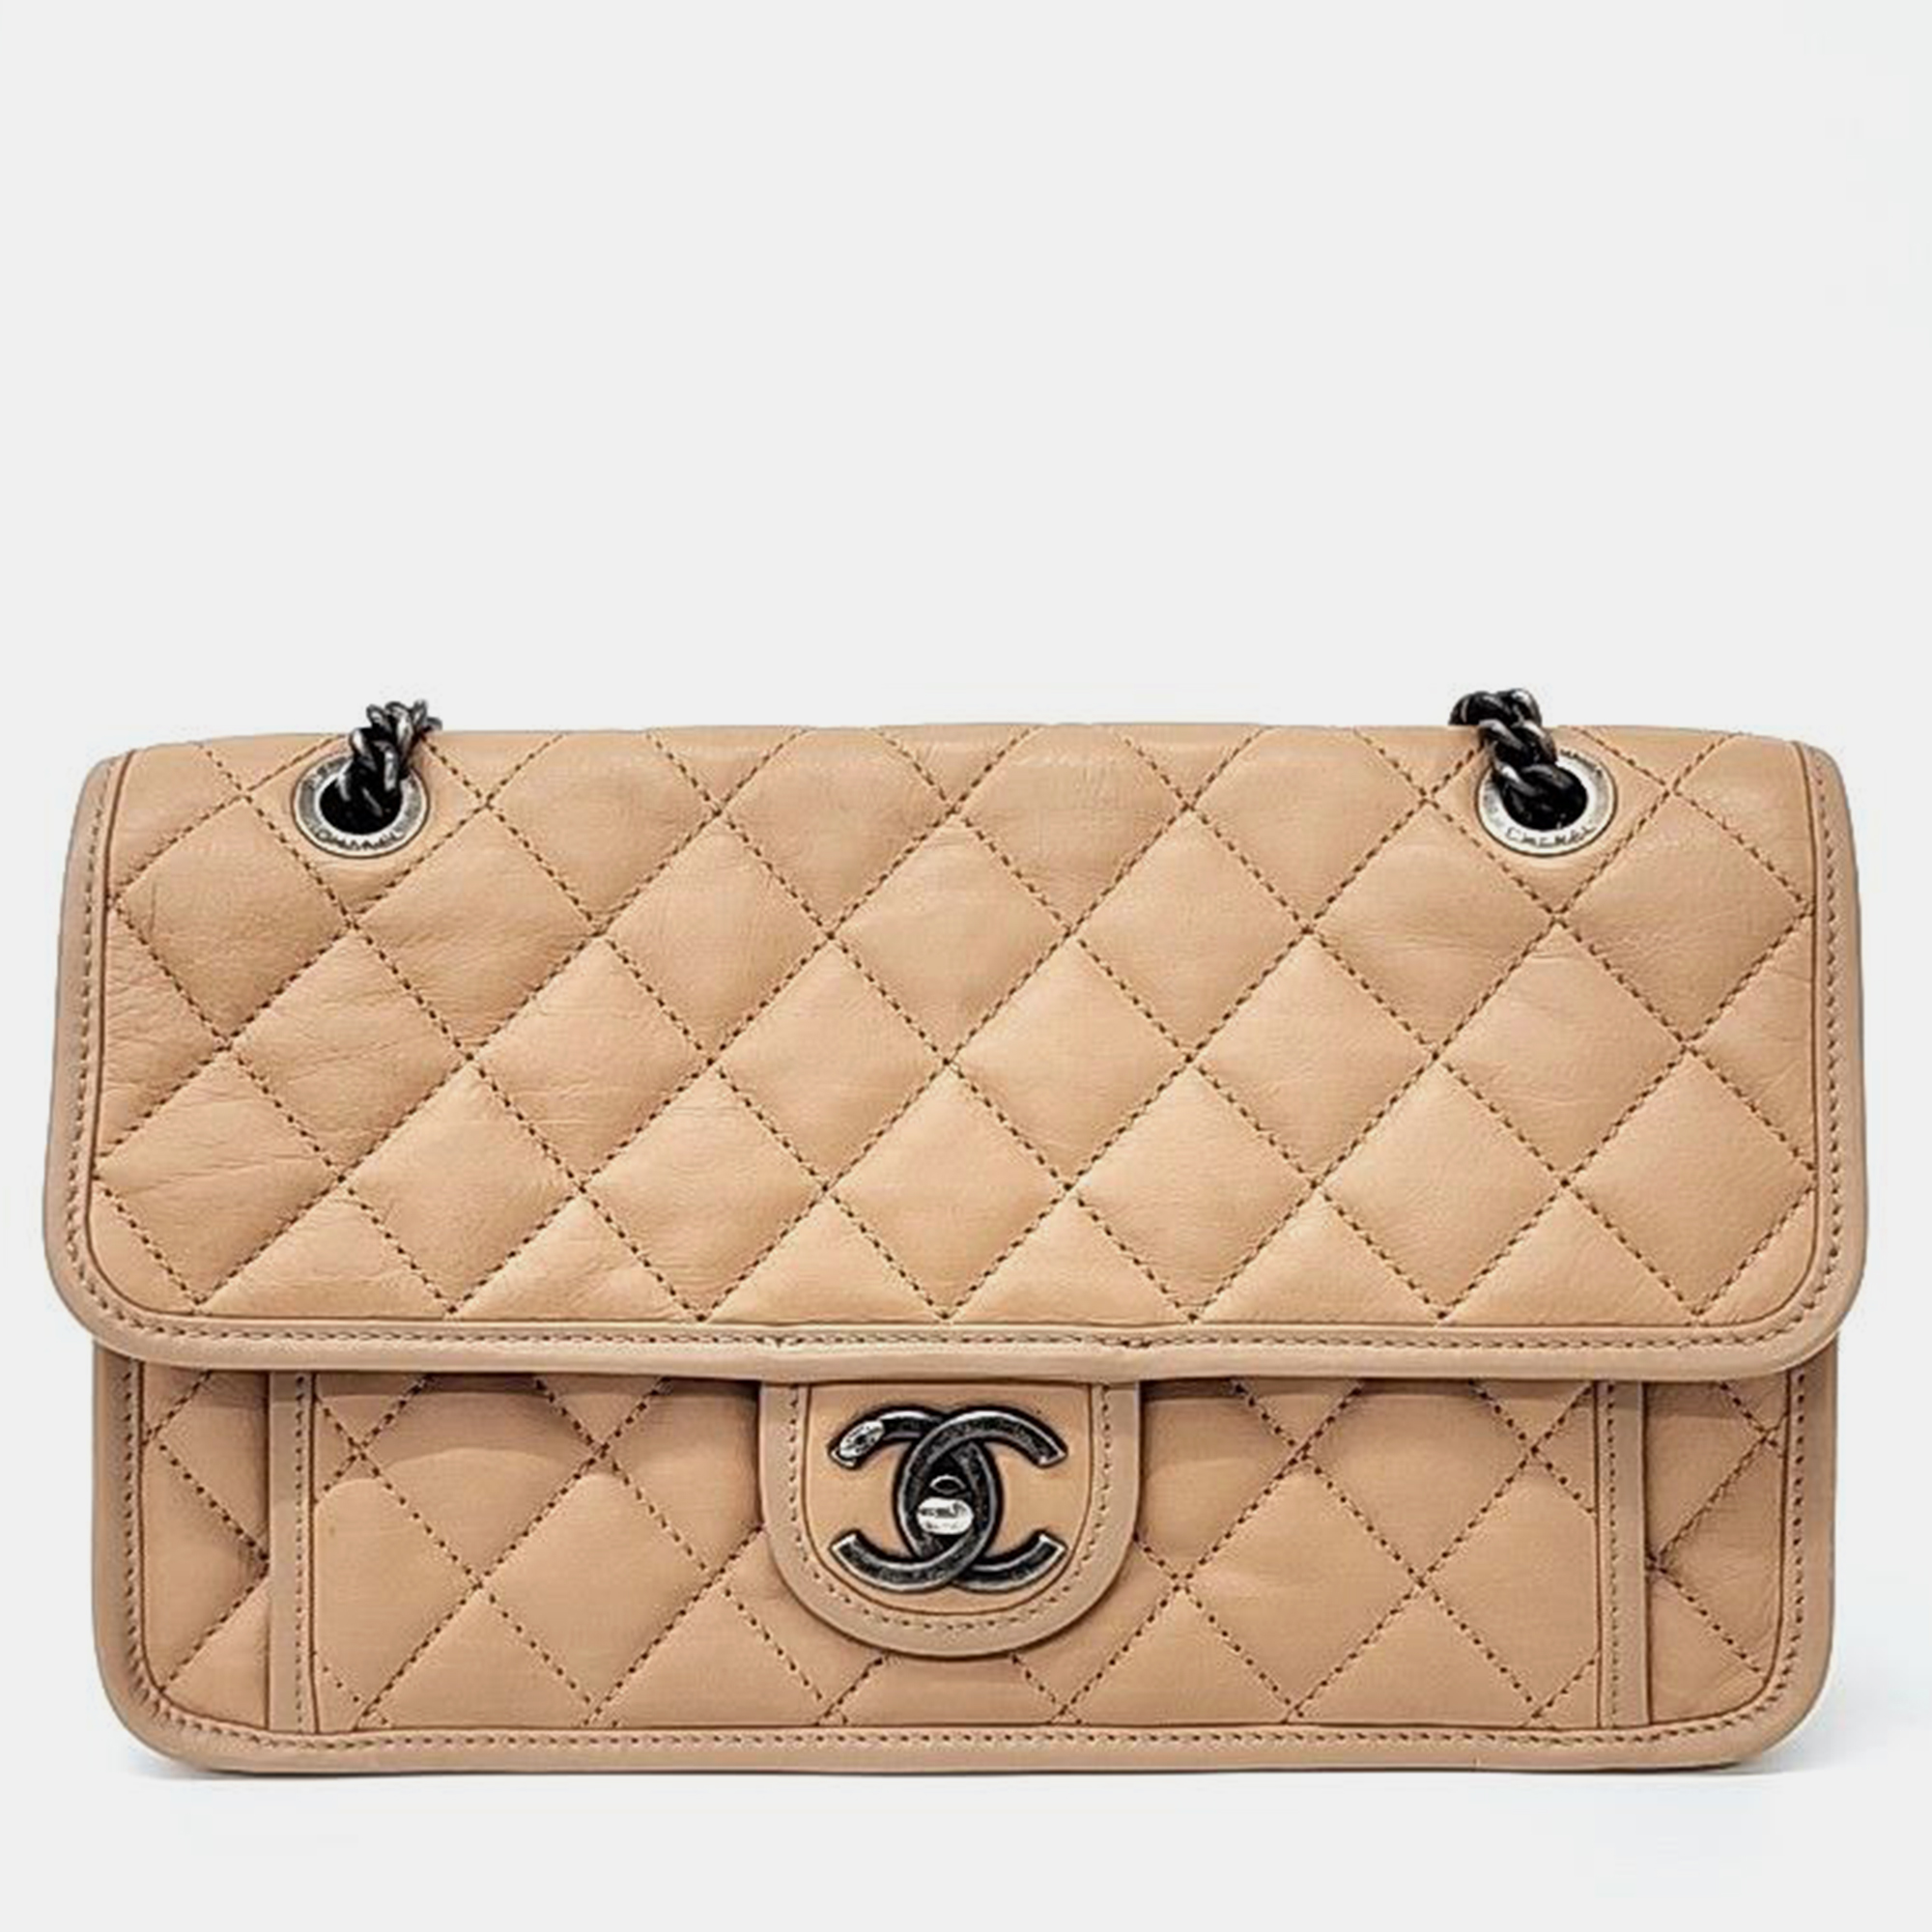 Chanel Leather Beige Flap Chain Bag